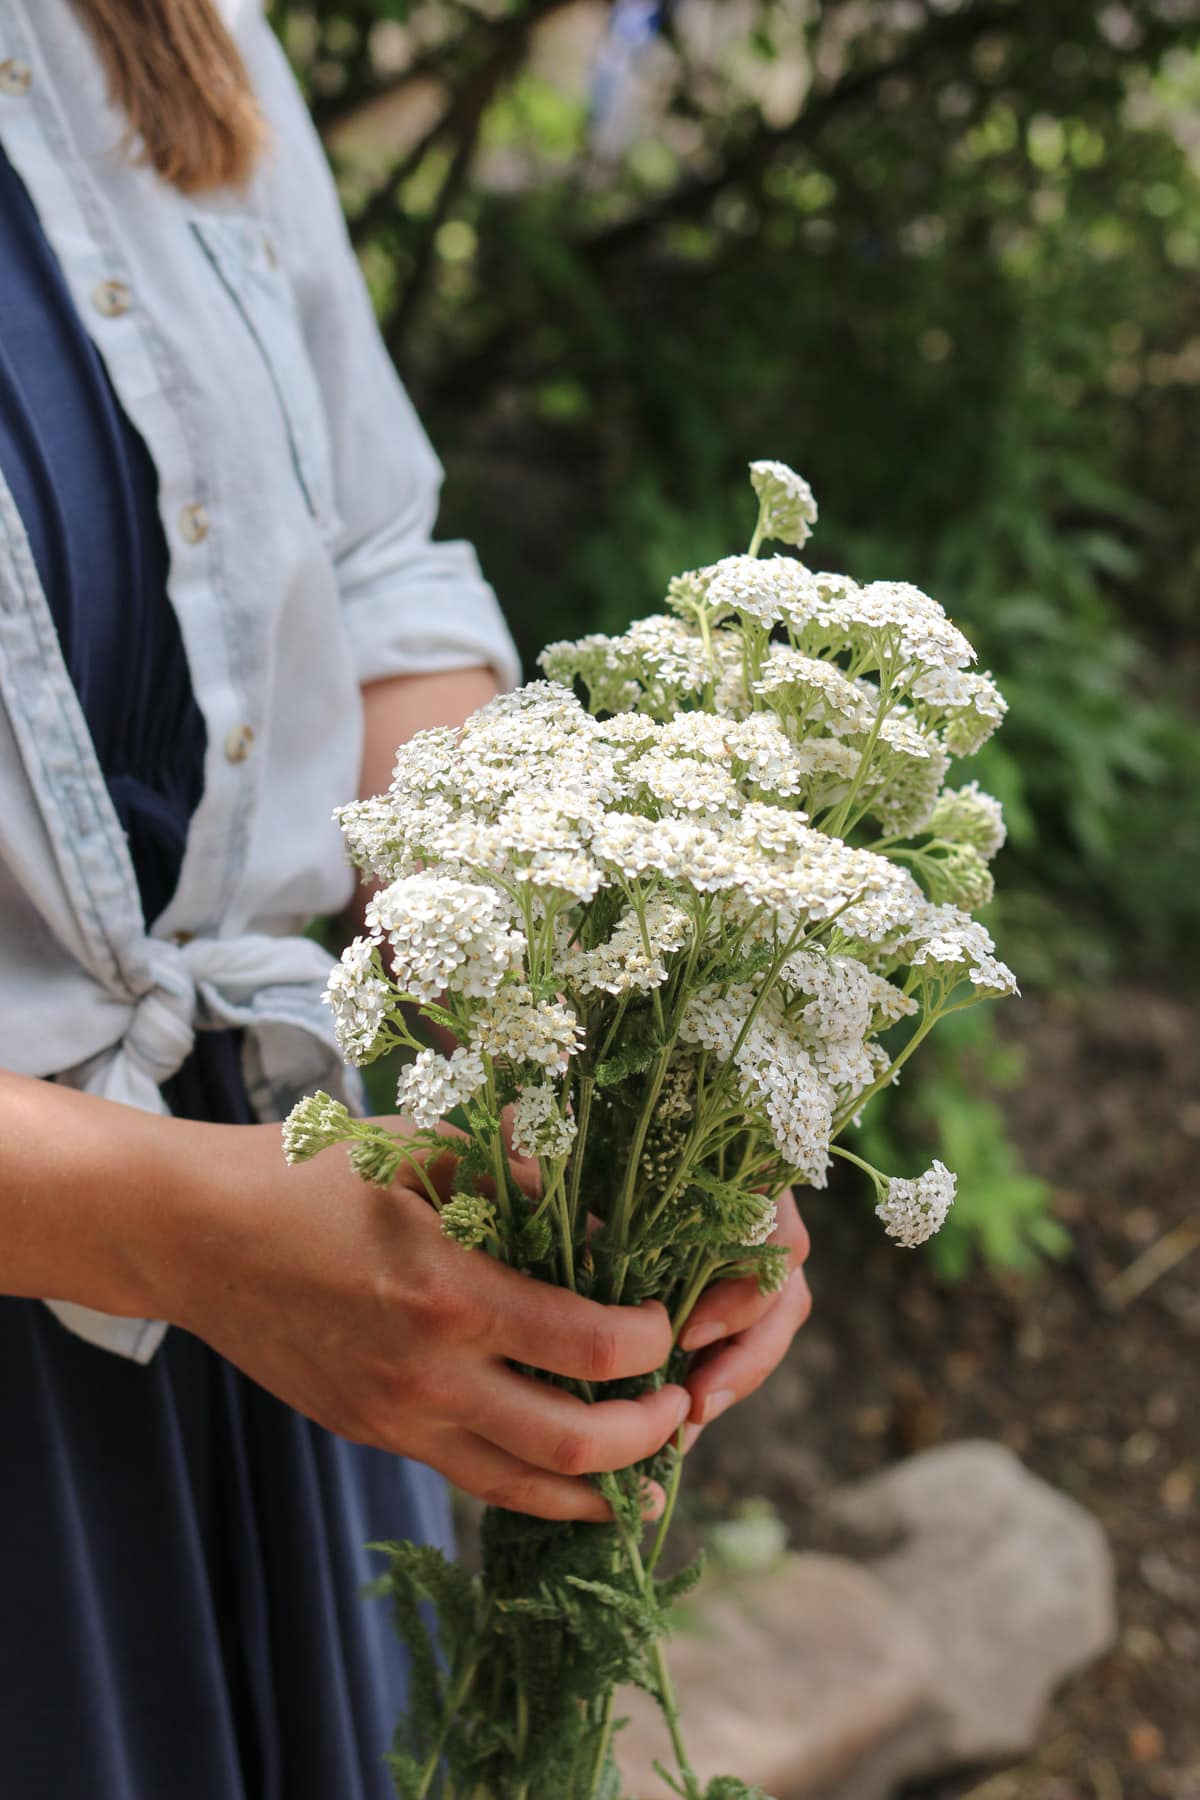 Woman holding stems of white yarrow flowers